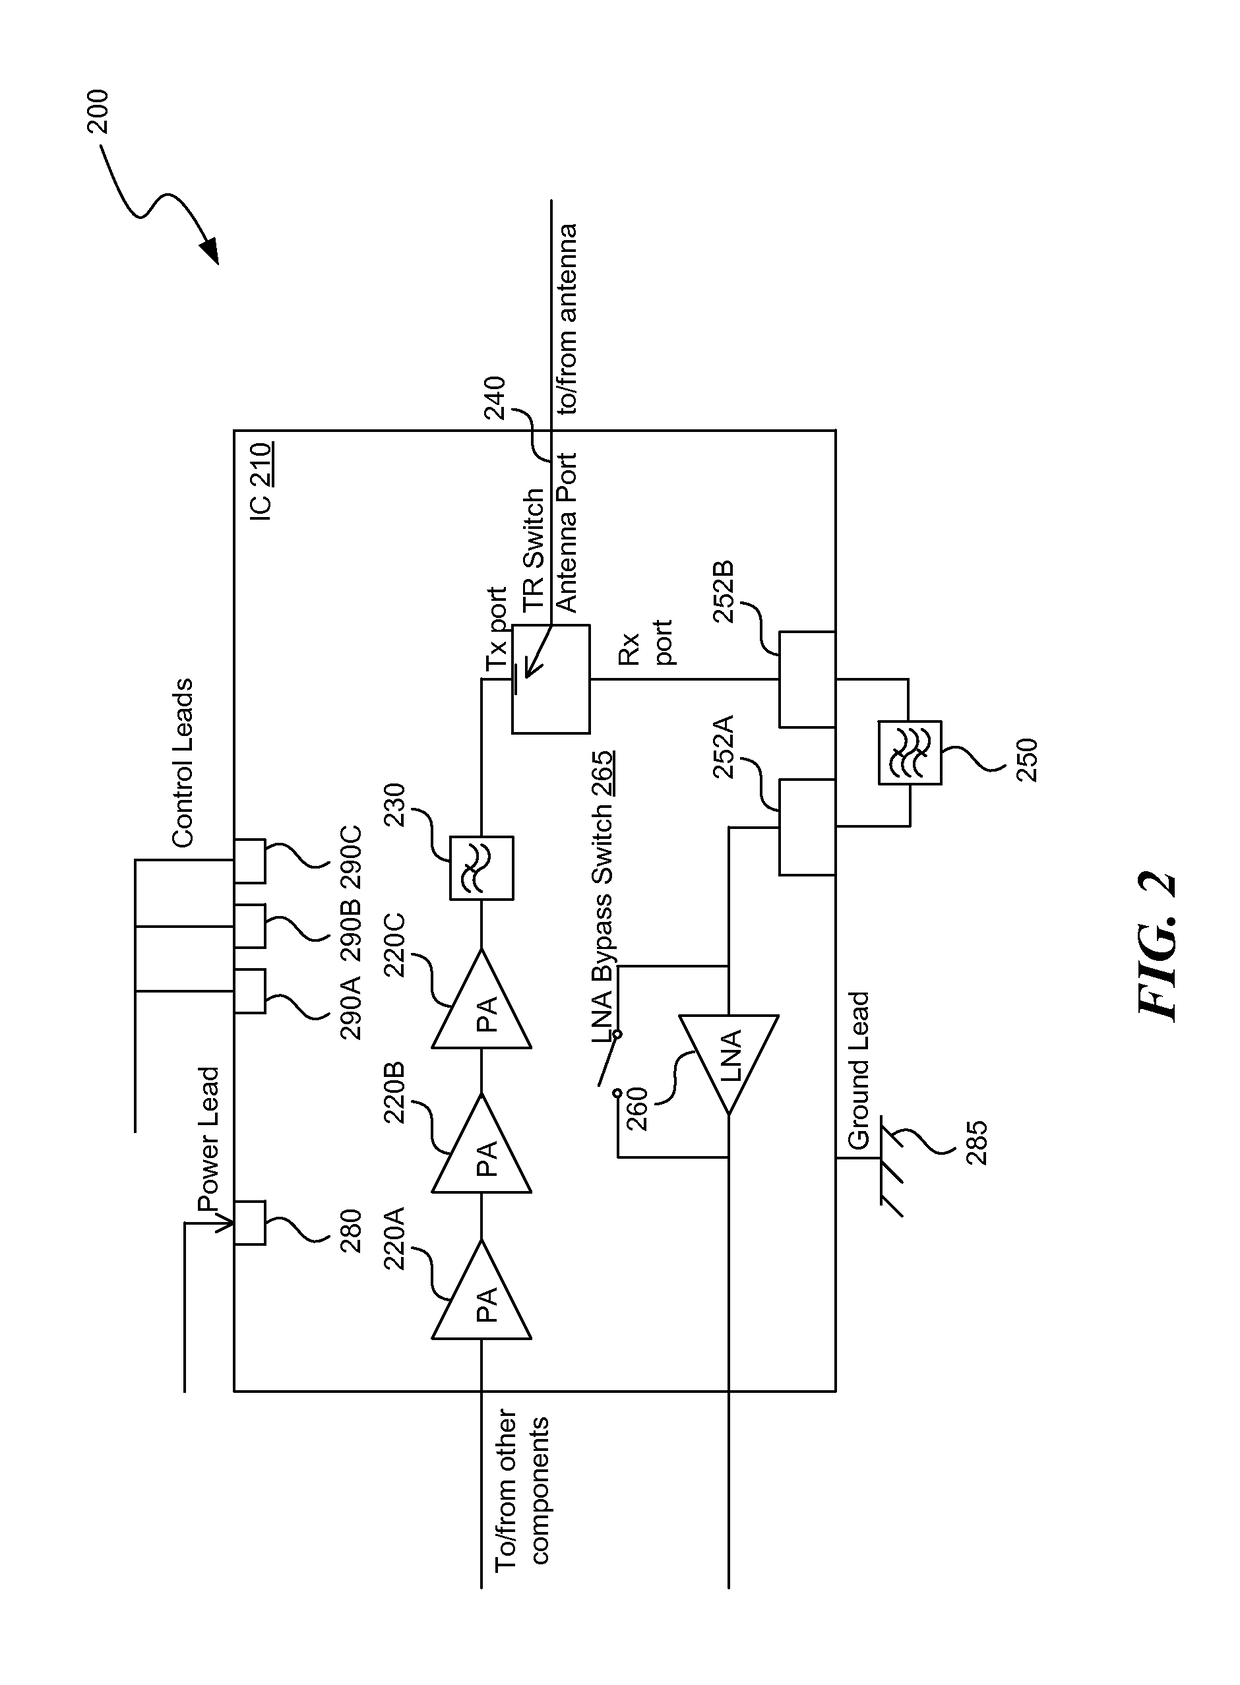 Radio frequency front end module with high band selectivity